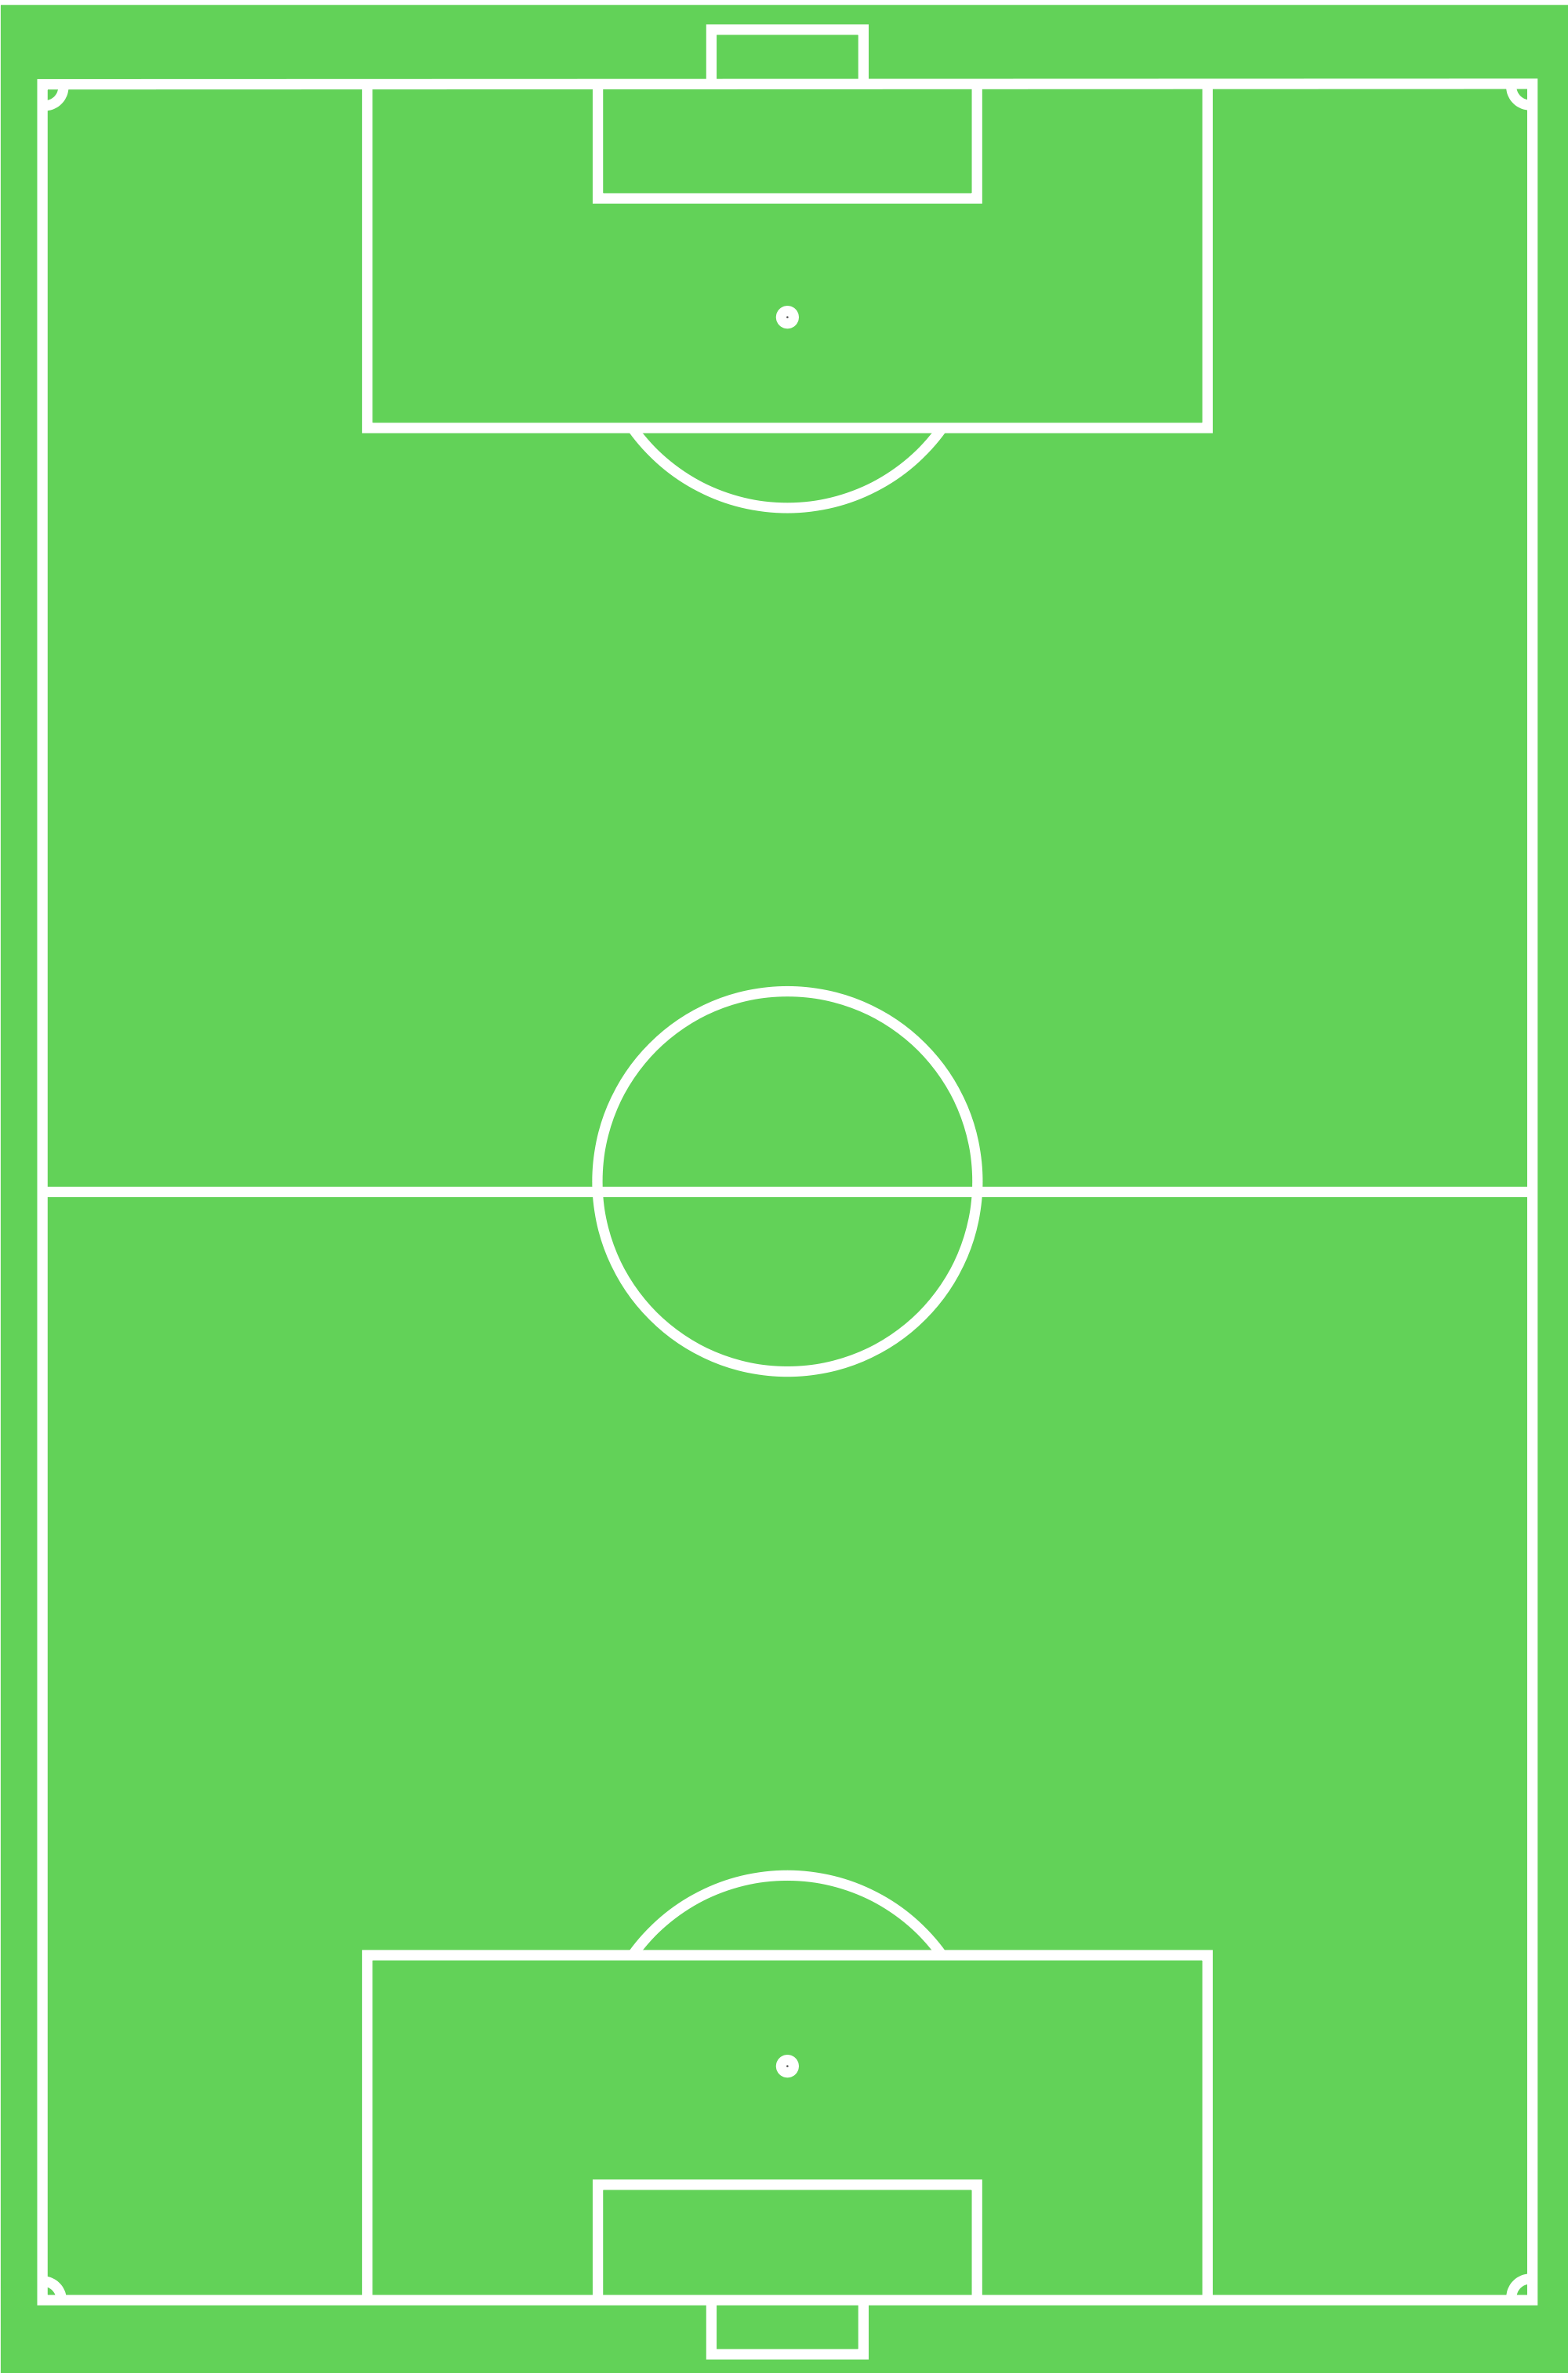 Soccer Field Layout Correct Dimensions Markings And Cake On ...